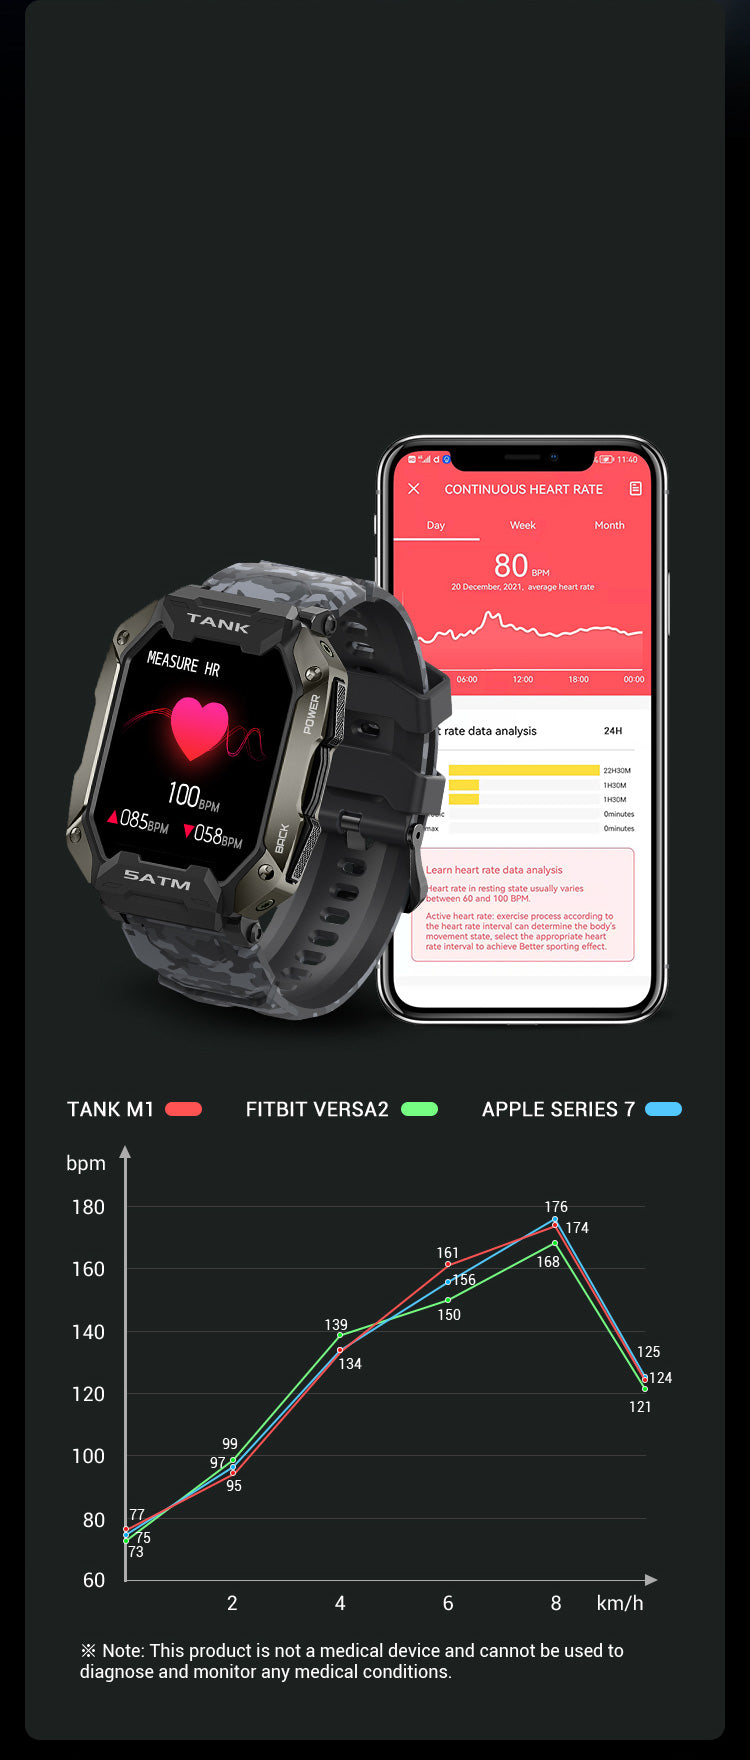 KOSPET TANK M1 Rugged Smart Watches support 24H static heart rate & dynamic heart rate warning